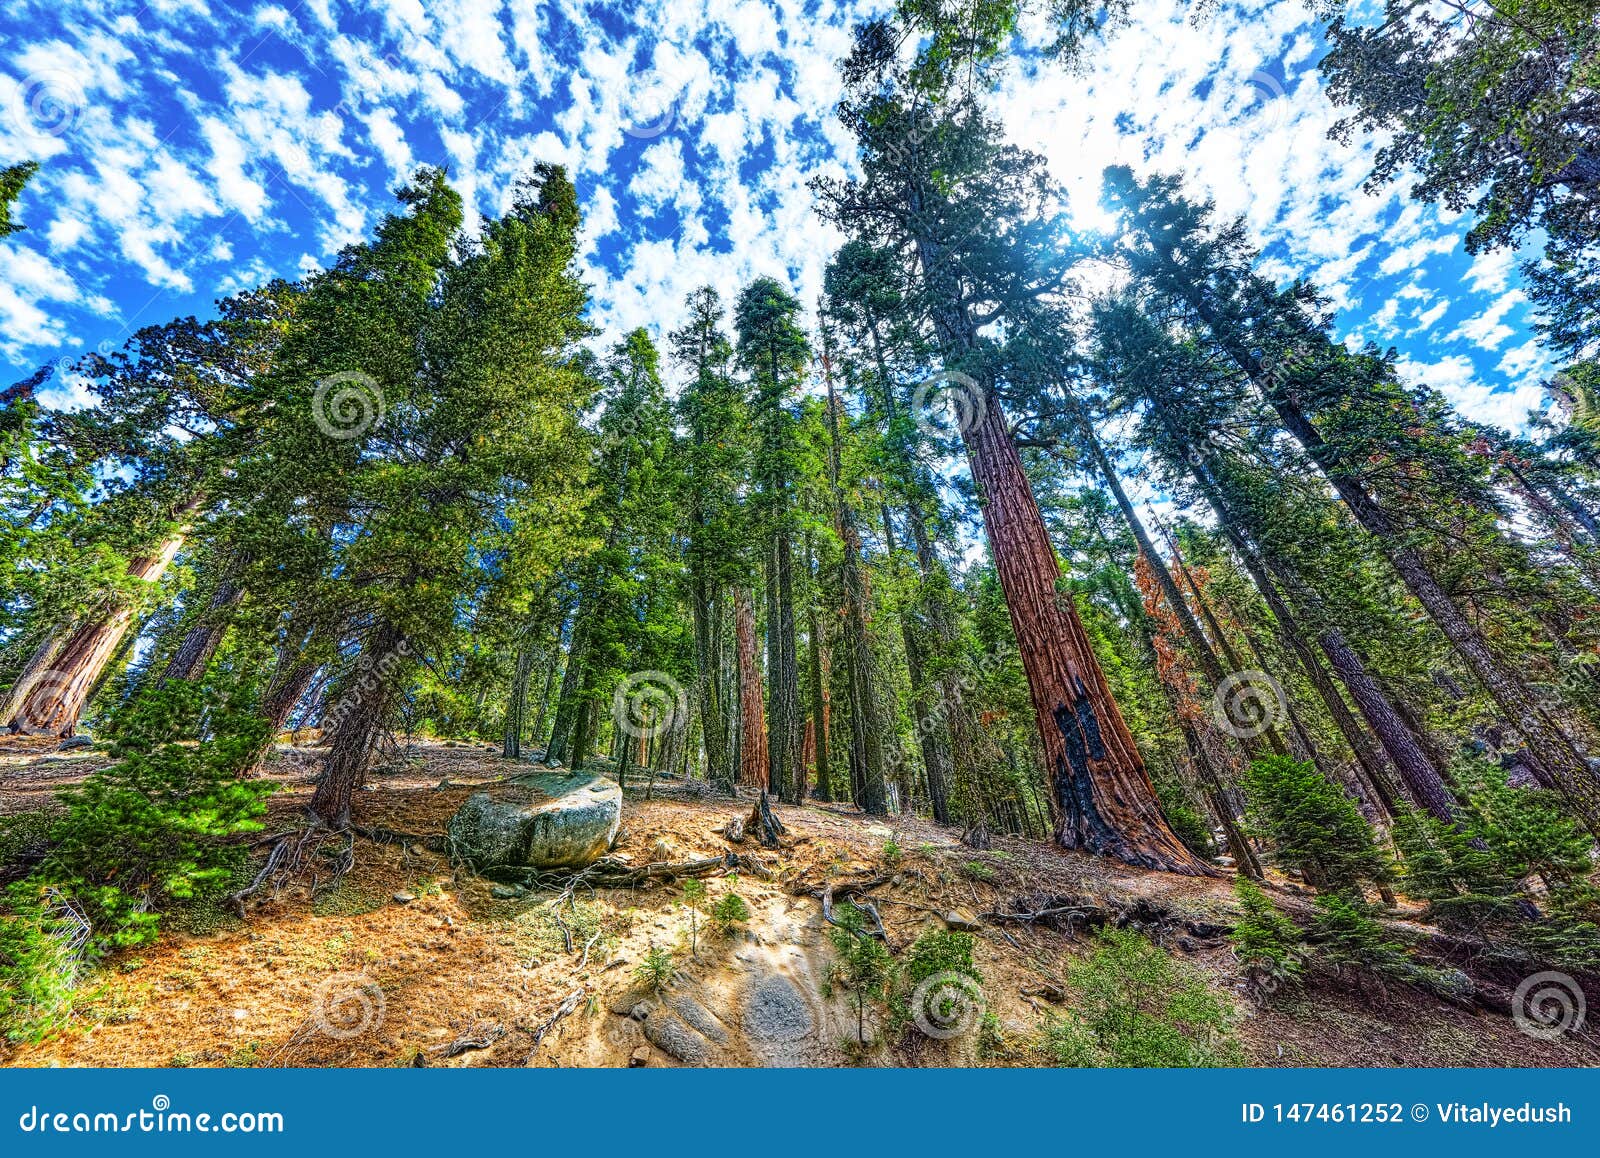 forest of ancient sequoias in yosemeti national park